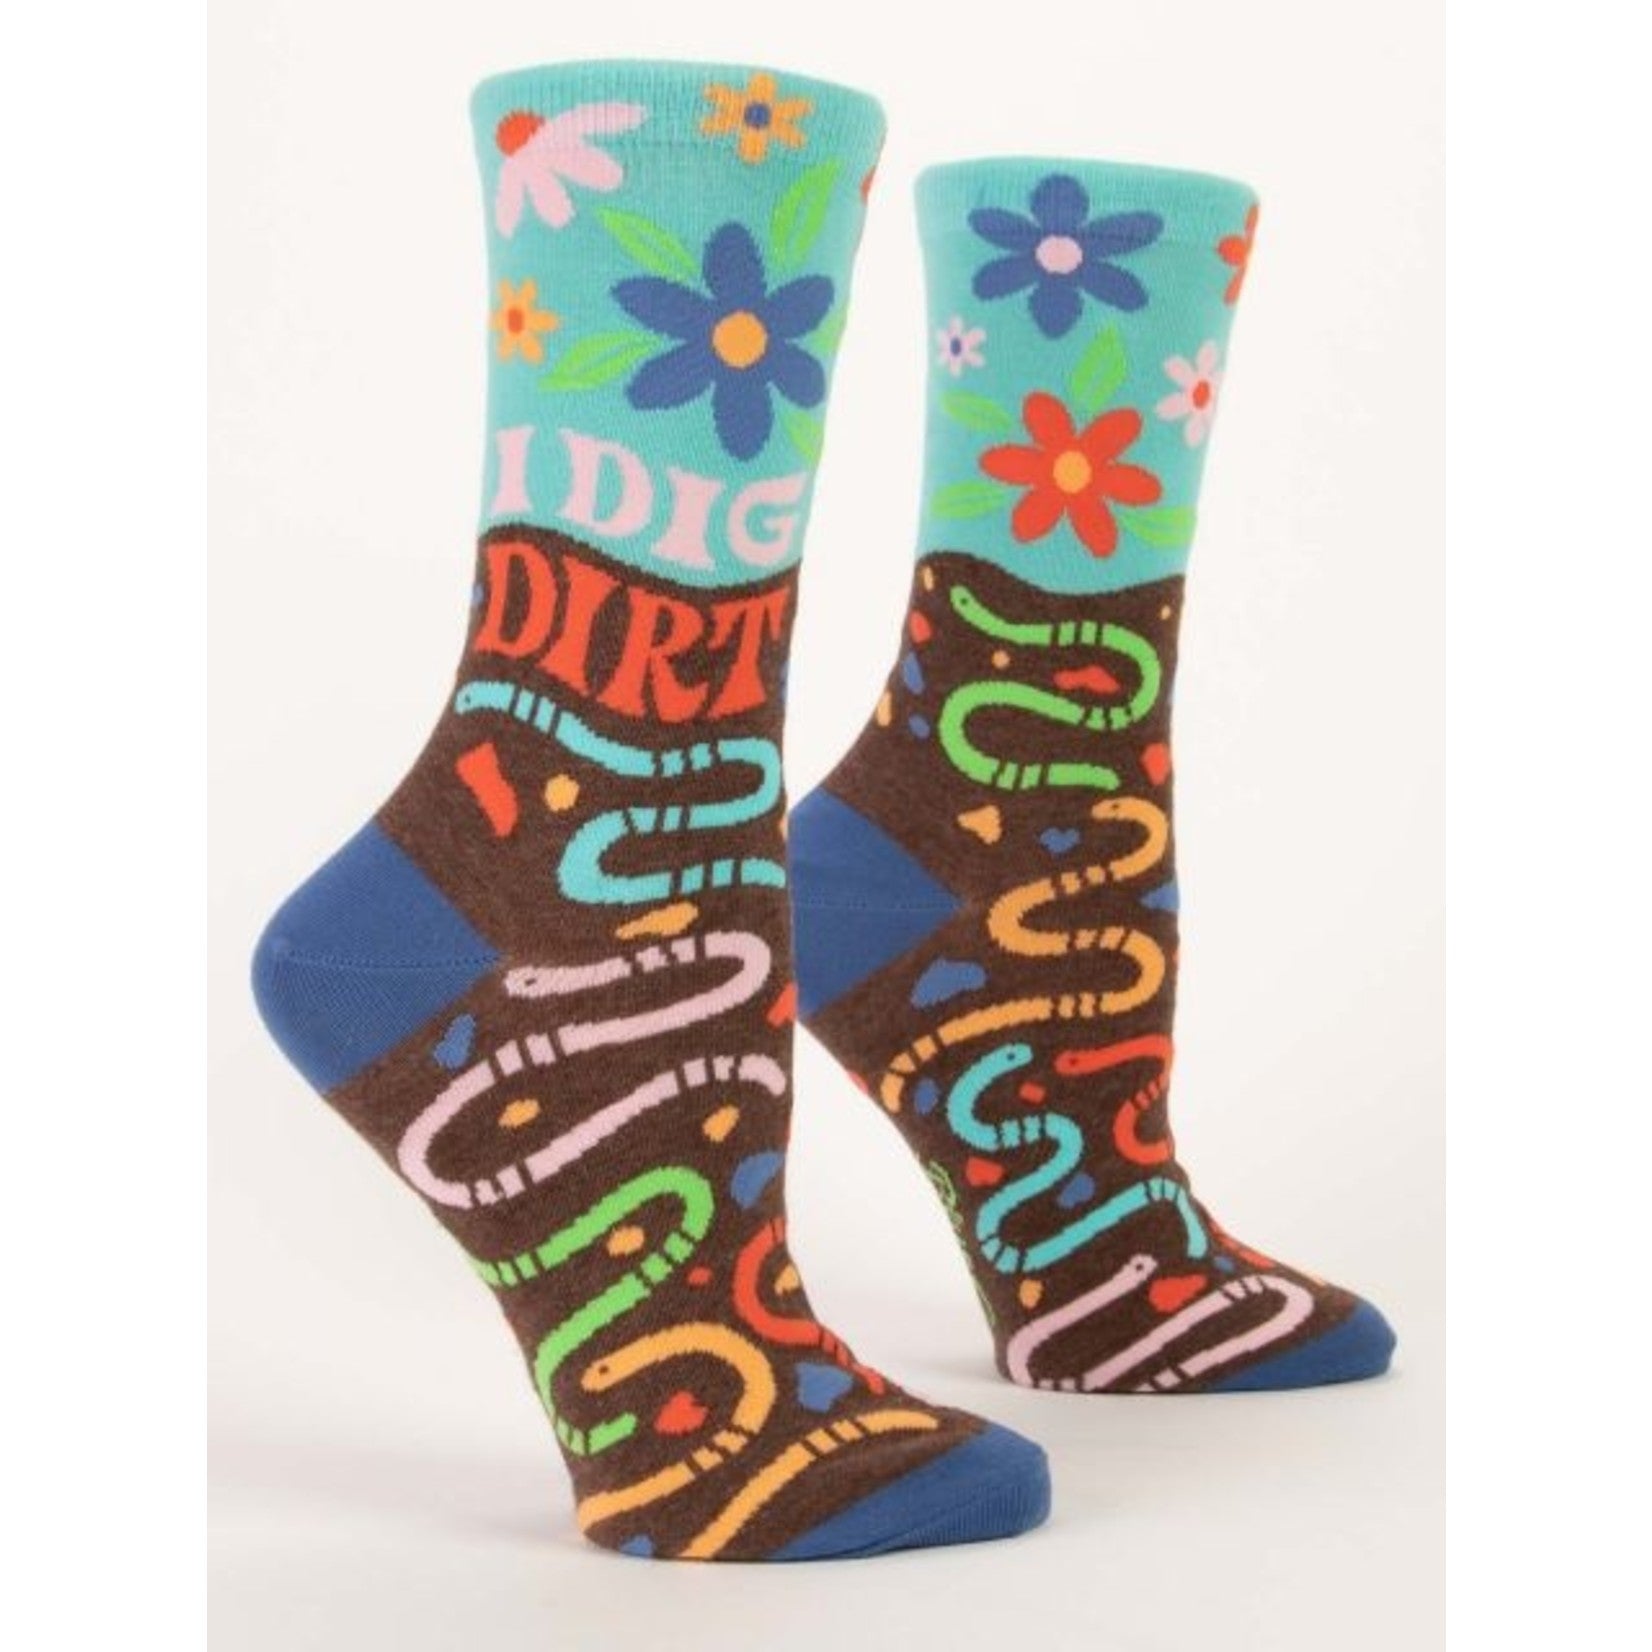 crew length socks on foot forms with colorful flowers, text that reads 